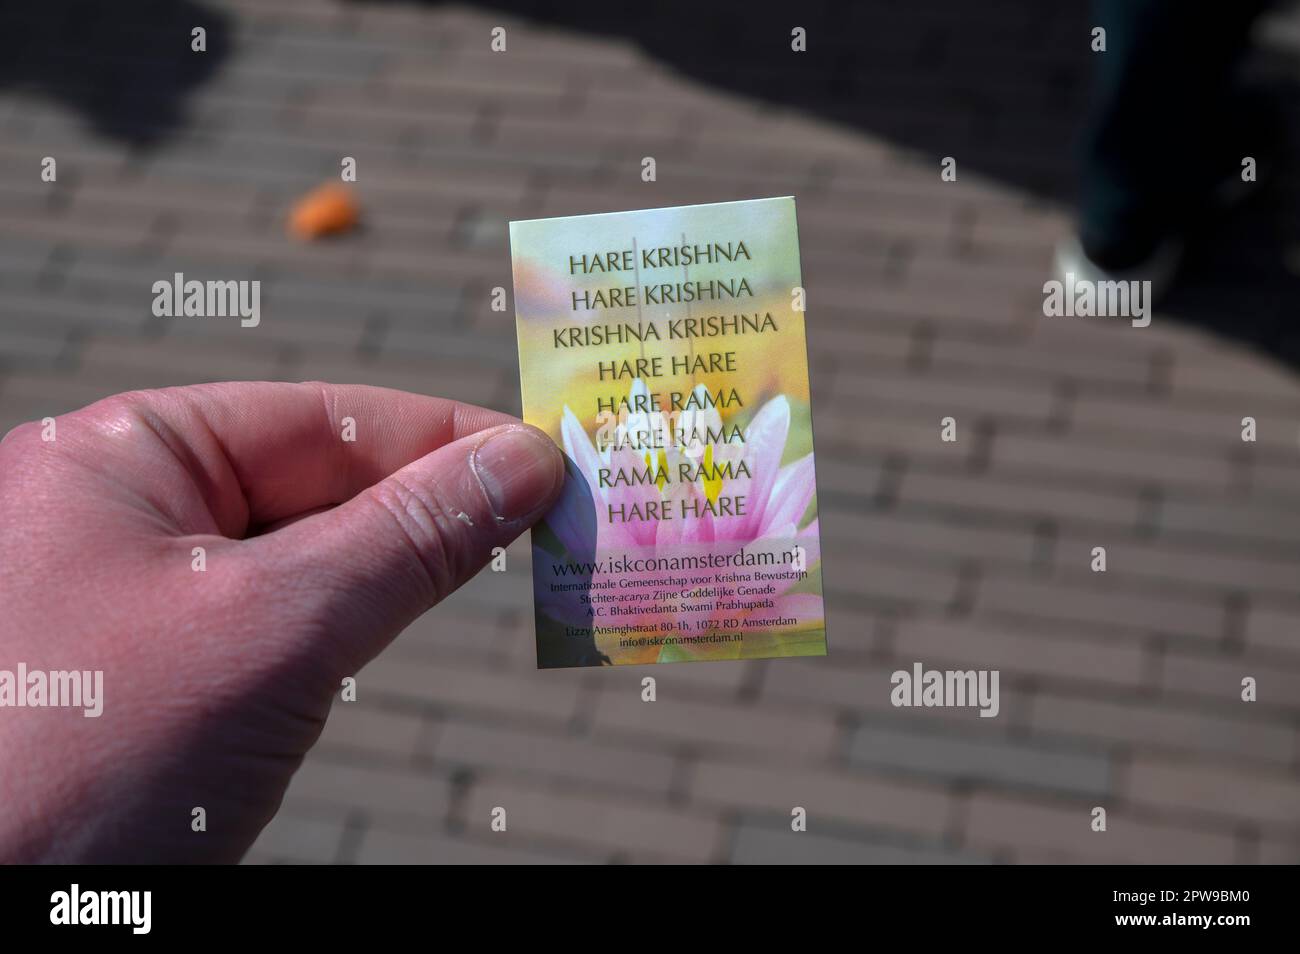 Business Card From The Hare Krishna Movement At Amsterdam The Netherlands 27-4-2023 Stock Photo